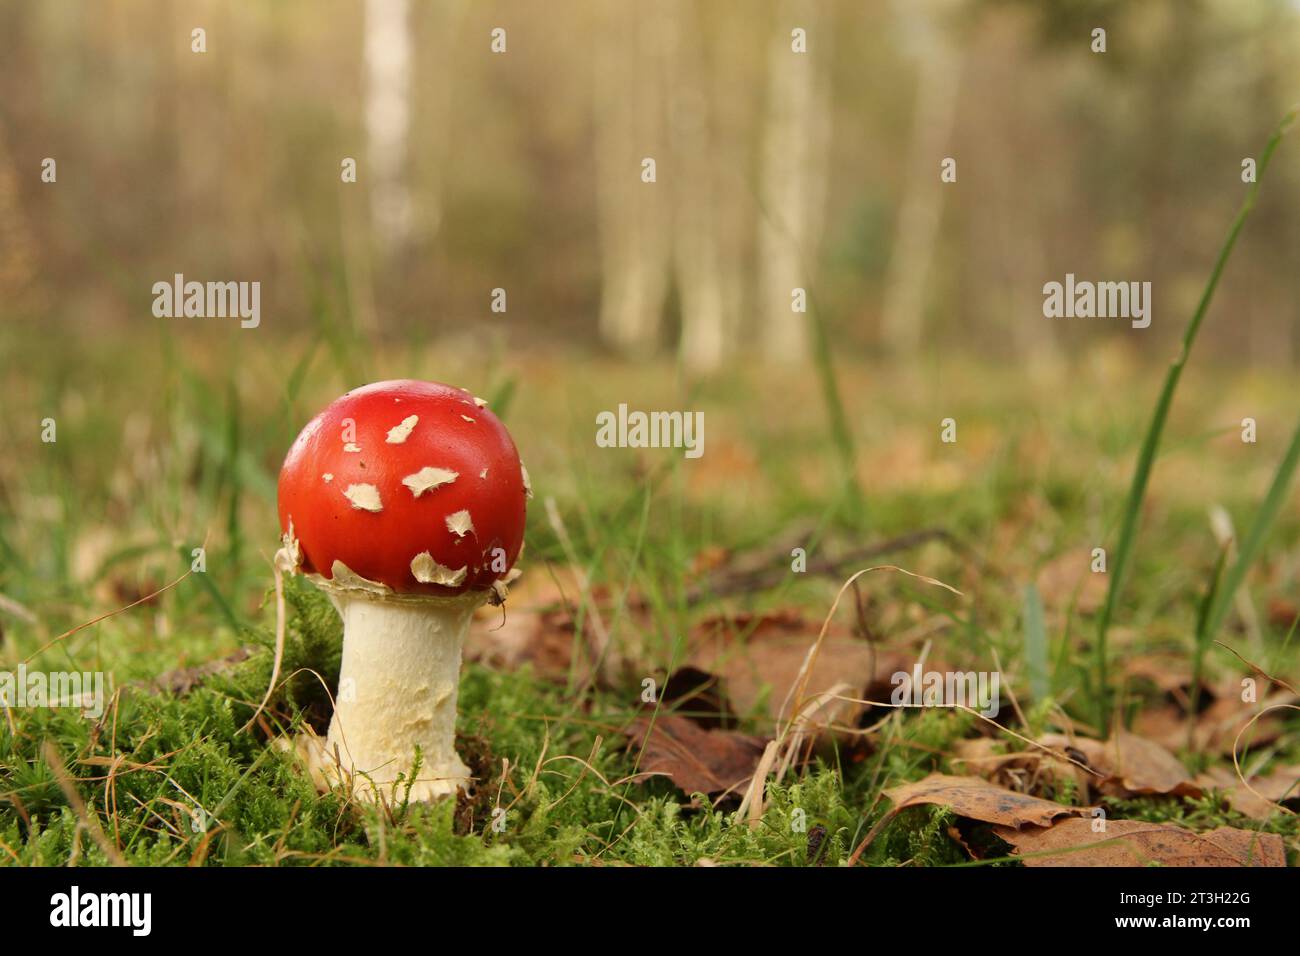 a very little cute red fly agaric mushroom closeup with a soft green background Stock Photo